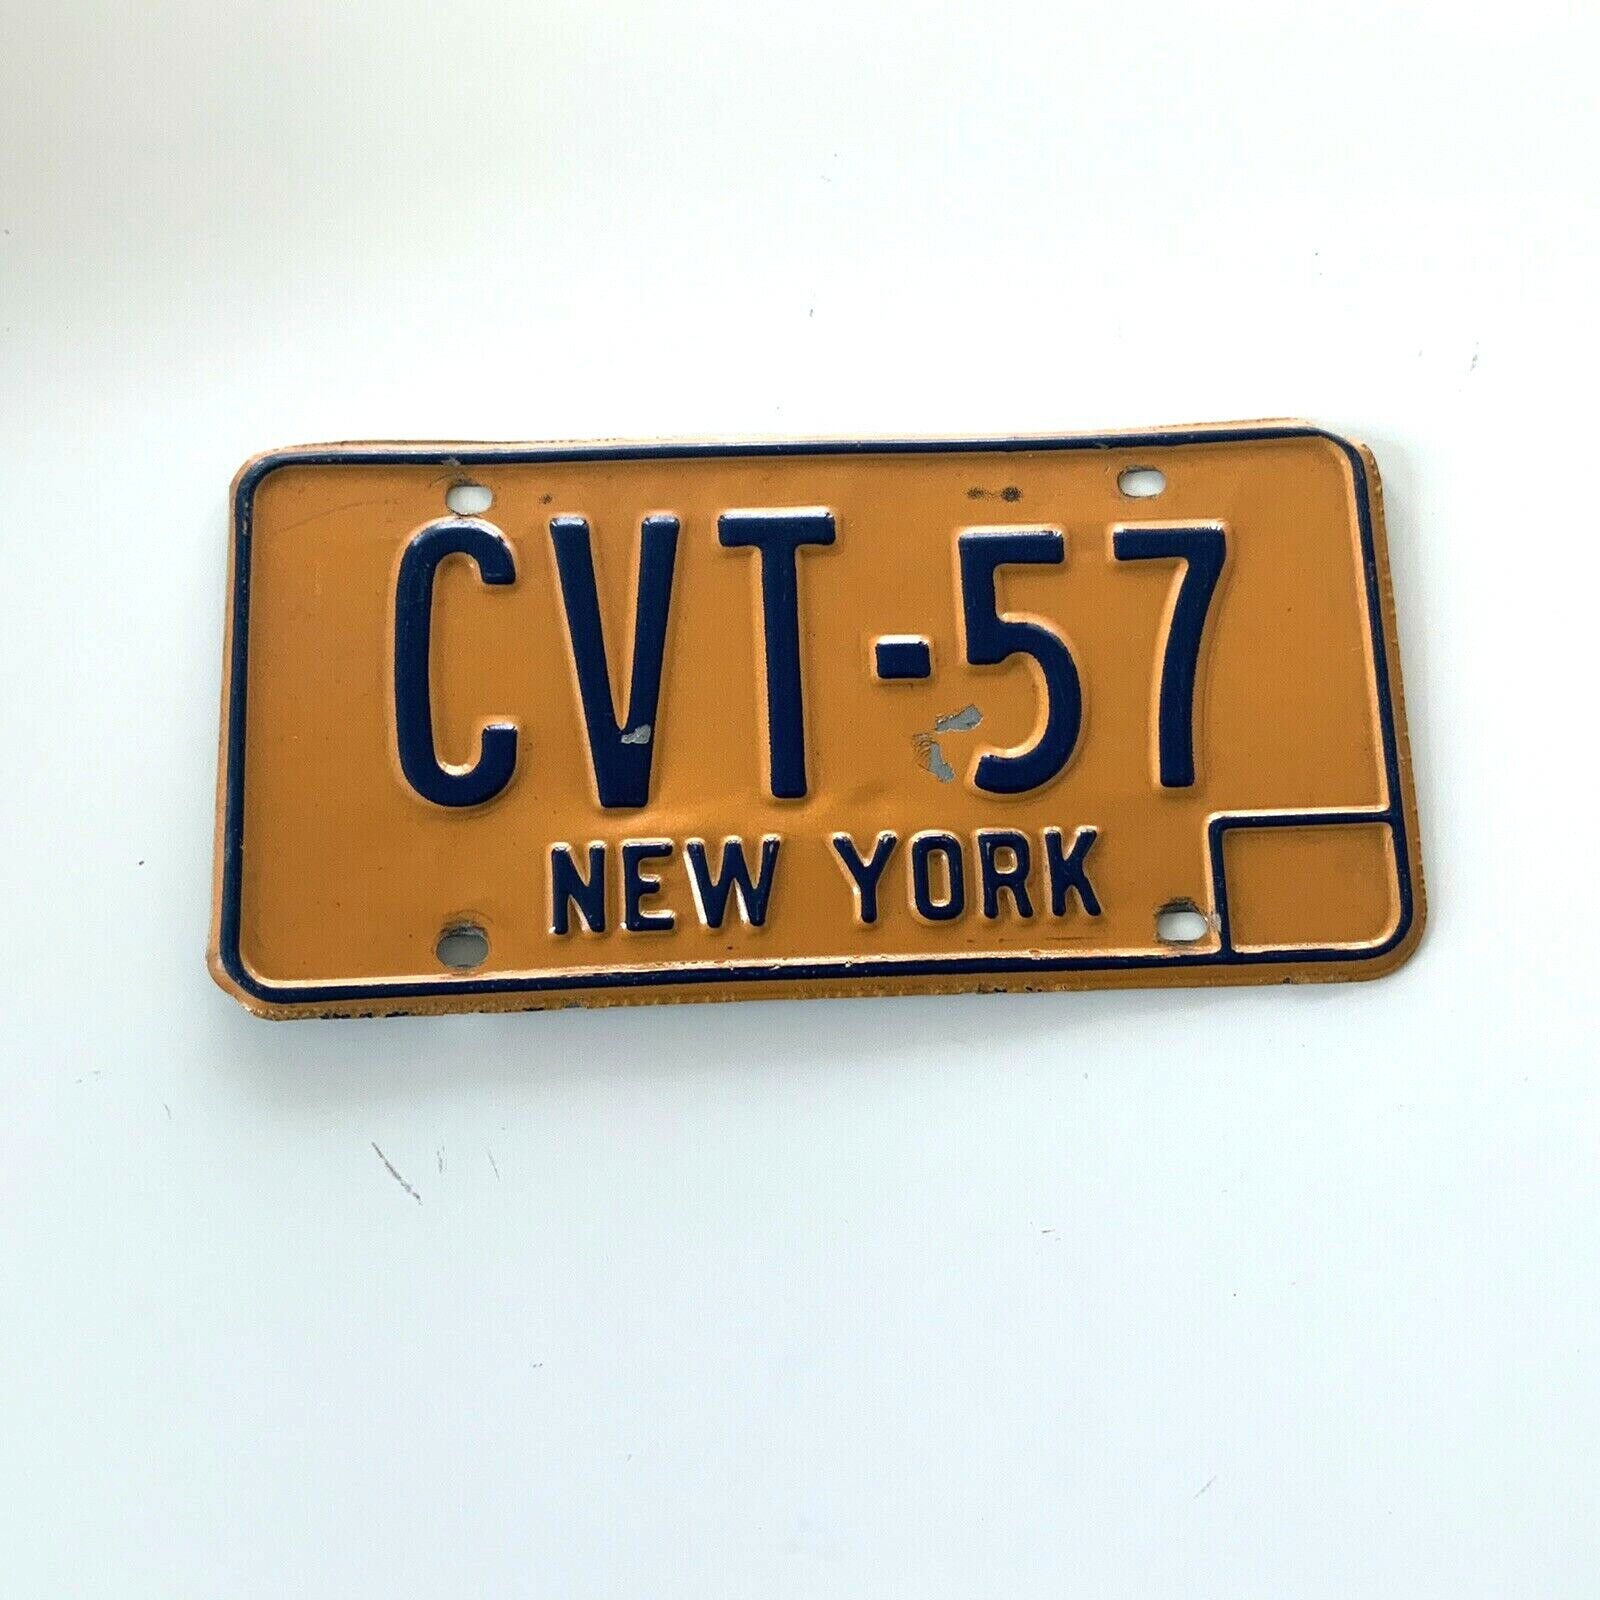 Chevrolet Corvette New York State License Plate Authentic CVT 57 Collector Car